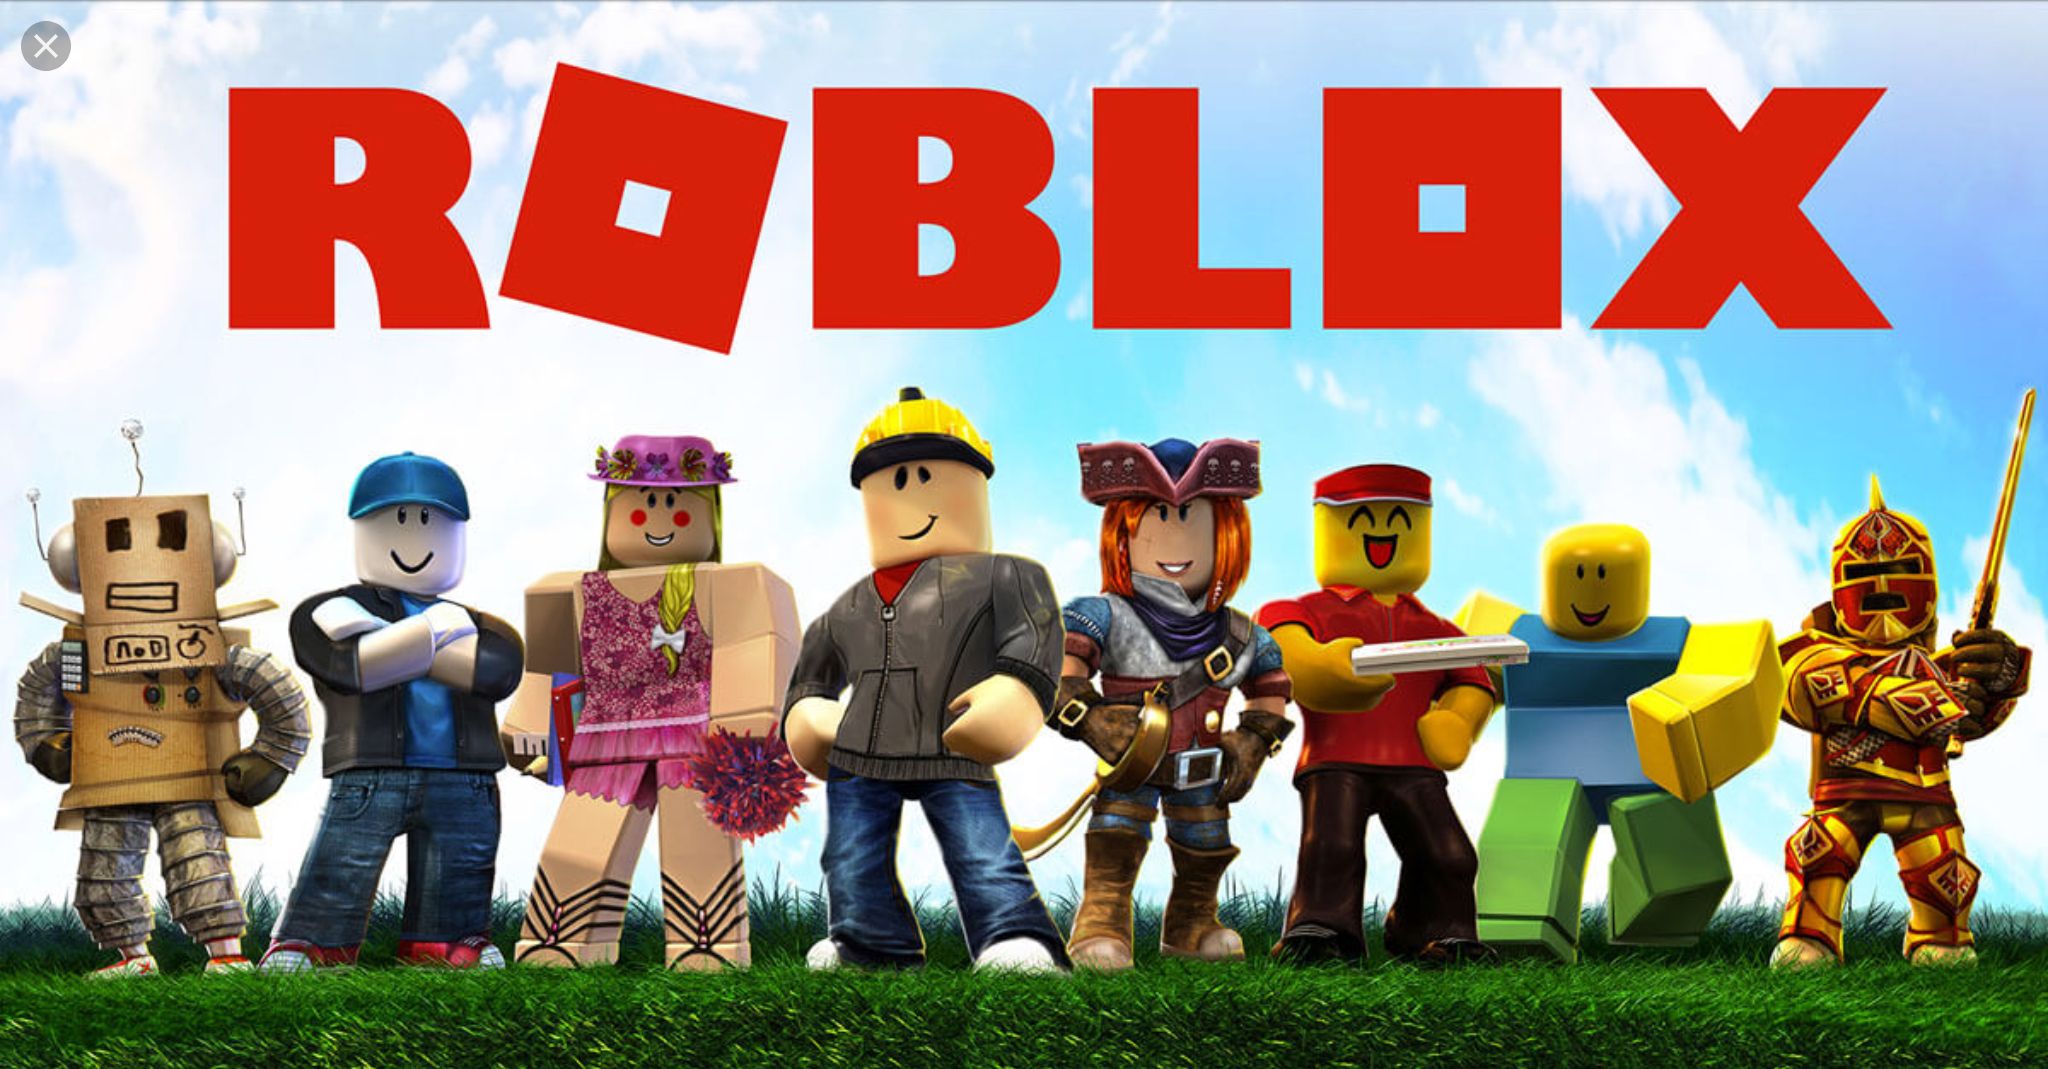 Cool Roblox Wallpapers For Phone